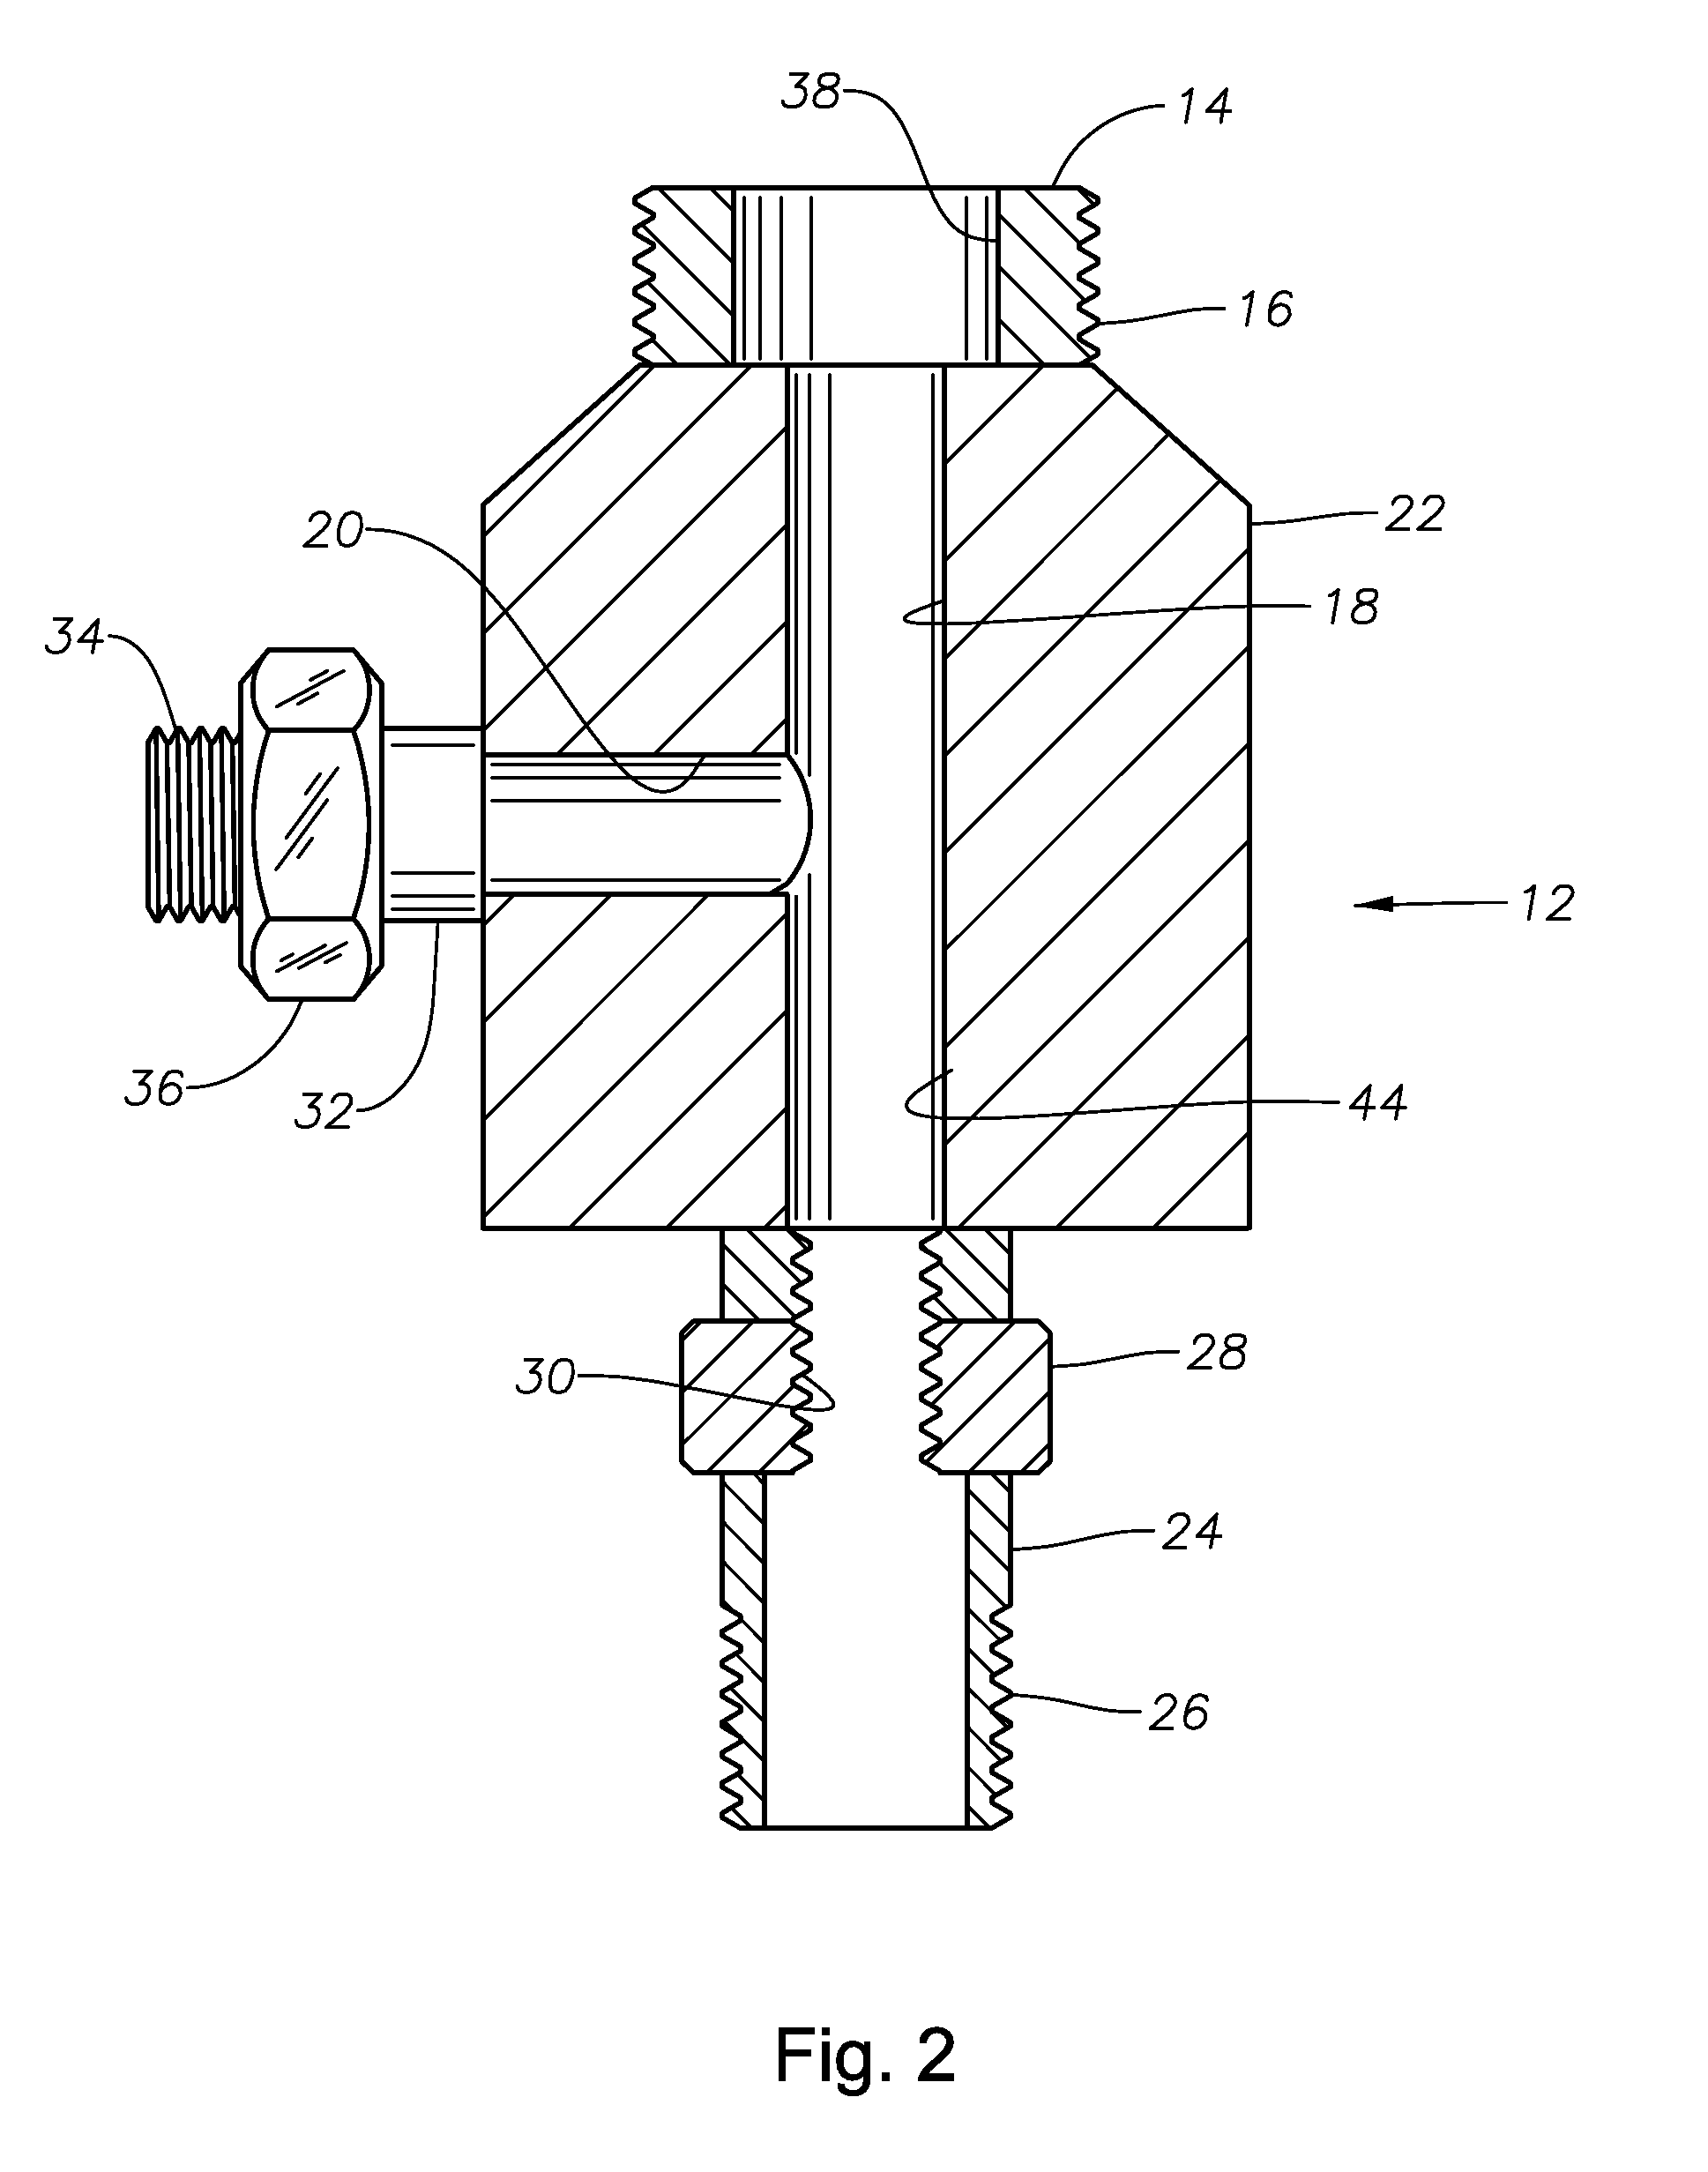 Method and apparatus for unplugging hydrocarbon drains or vents